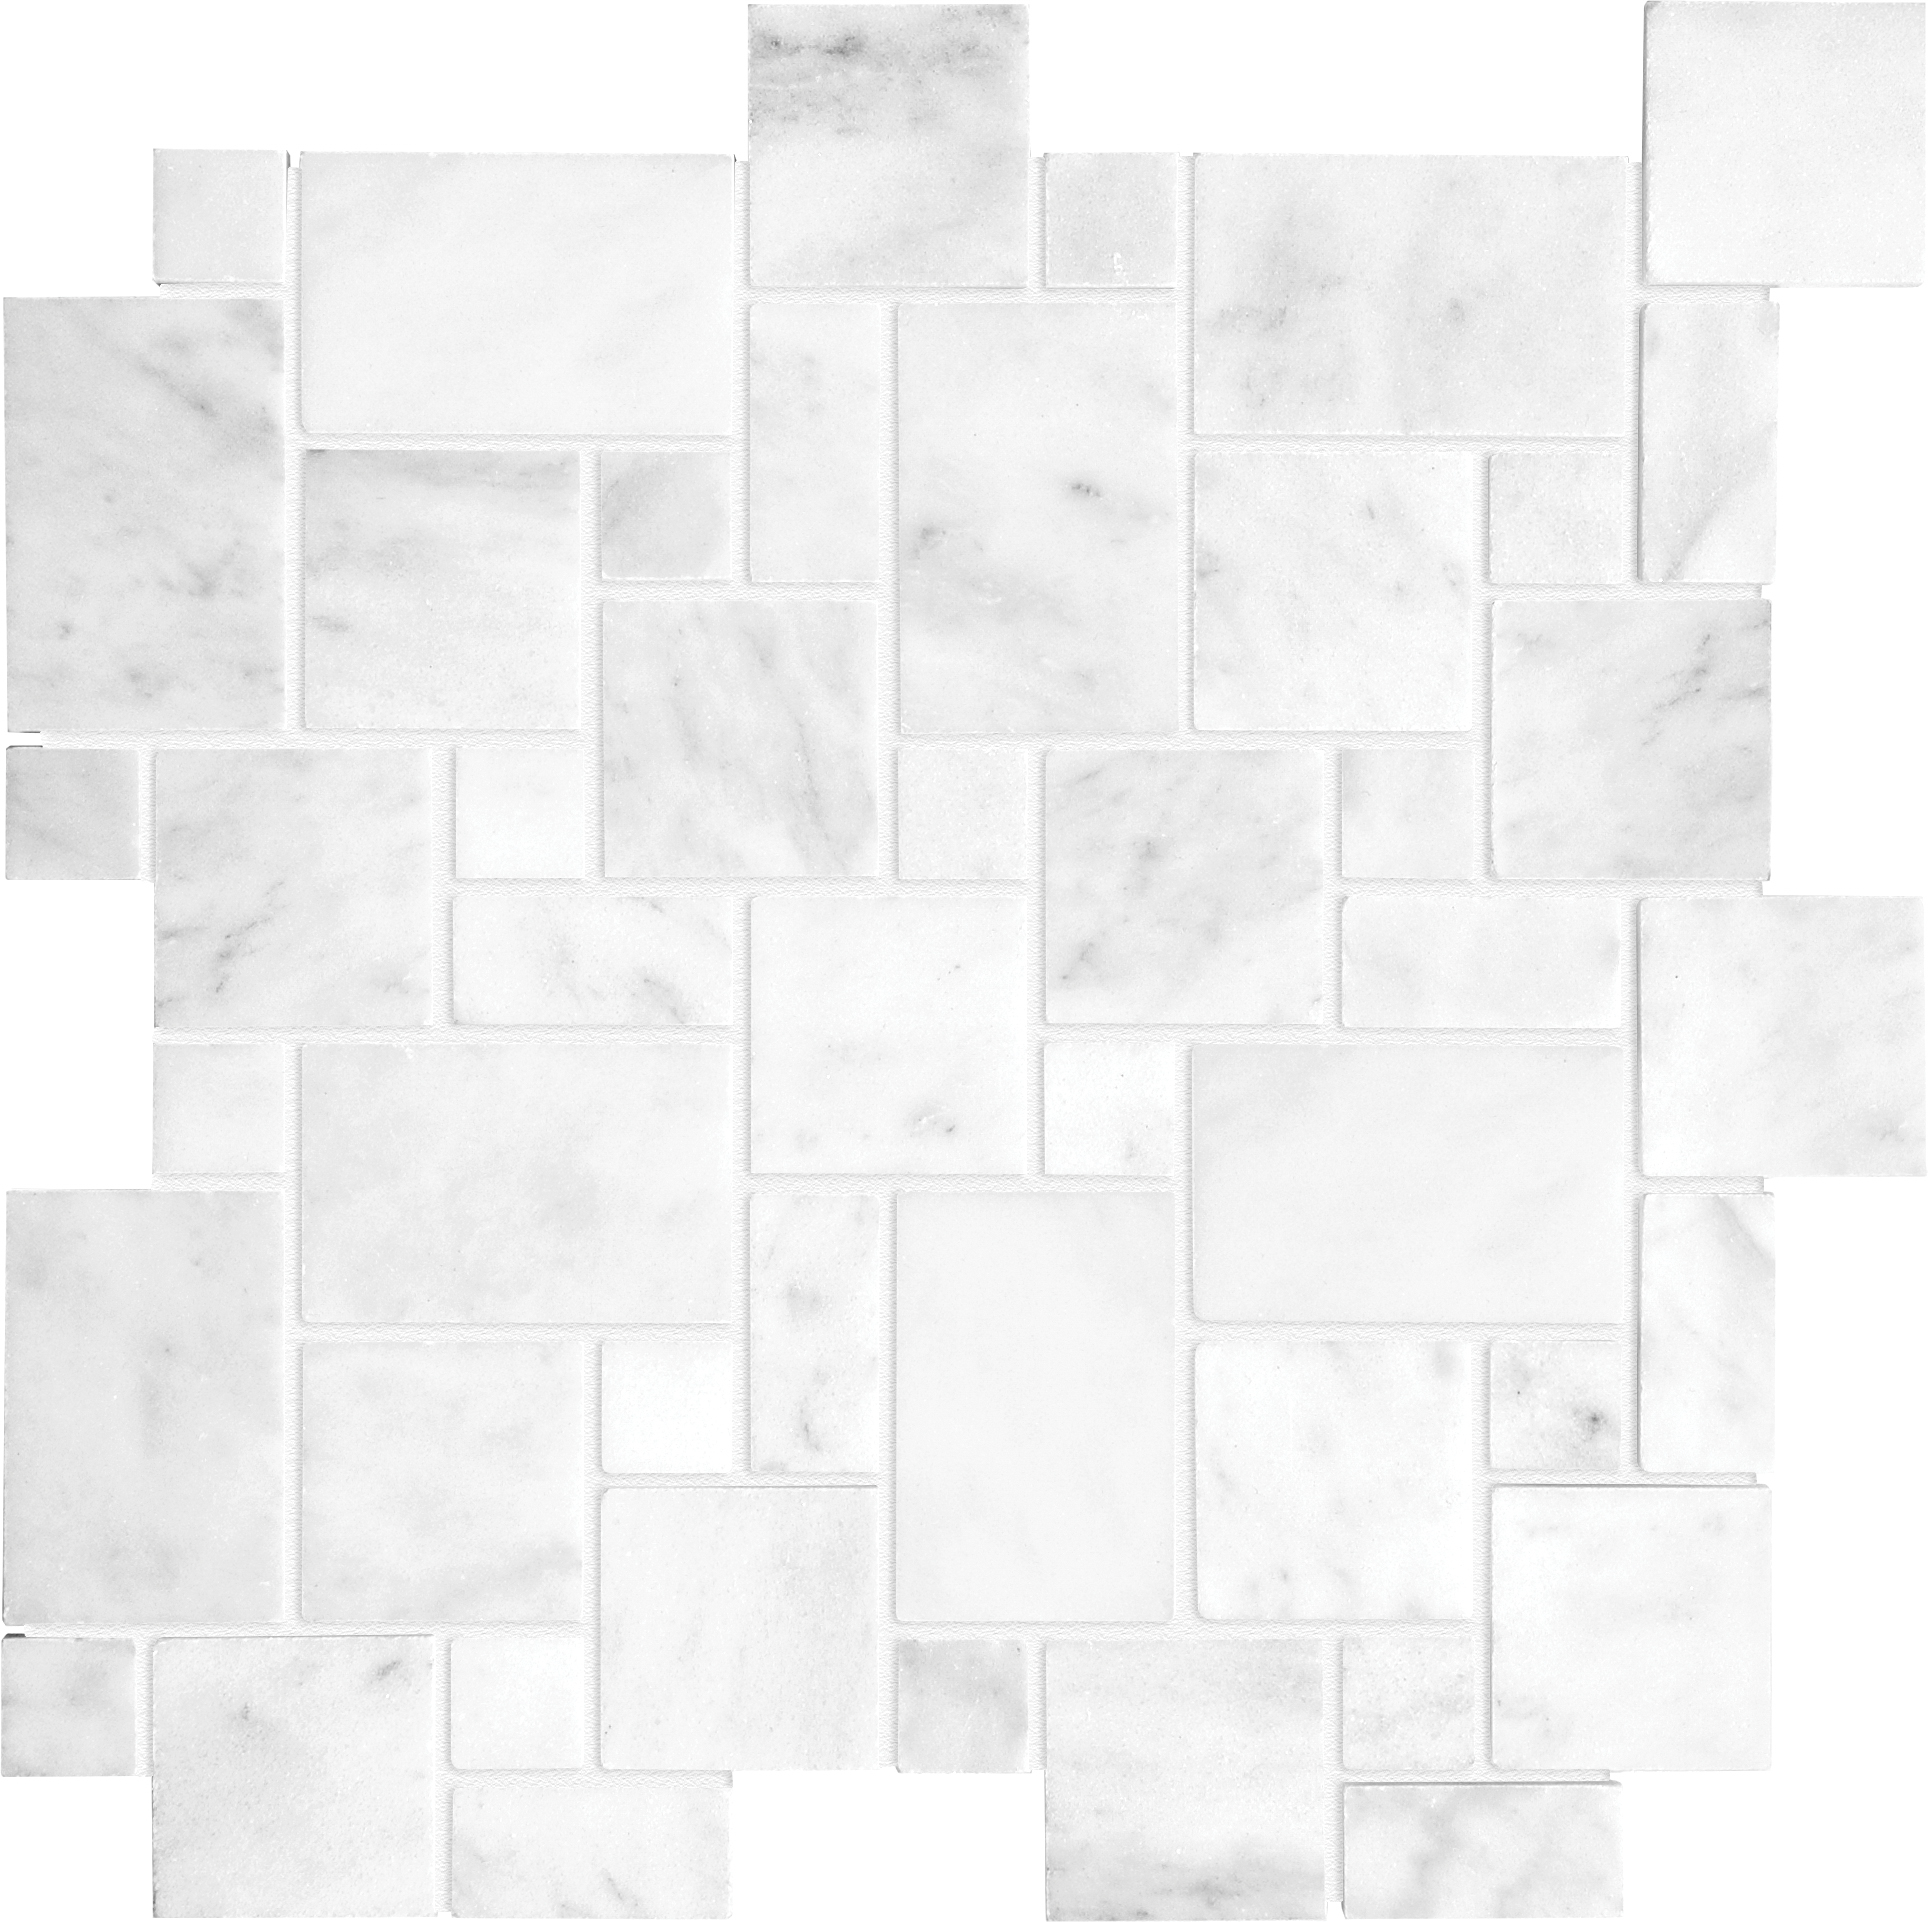 marble mini versailles pattern natural stone mosaic from bianco venatino anatolia collection distributed by surface group international honed finish straight edge edge mesh shape